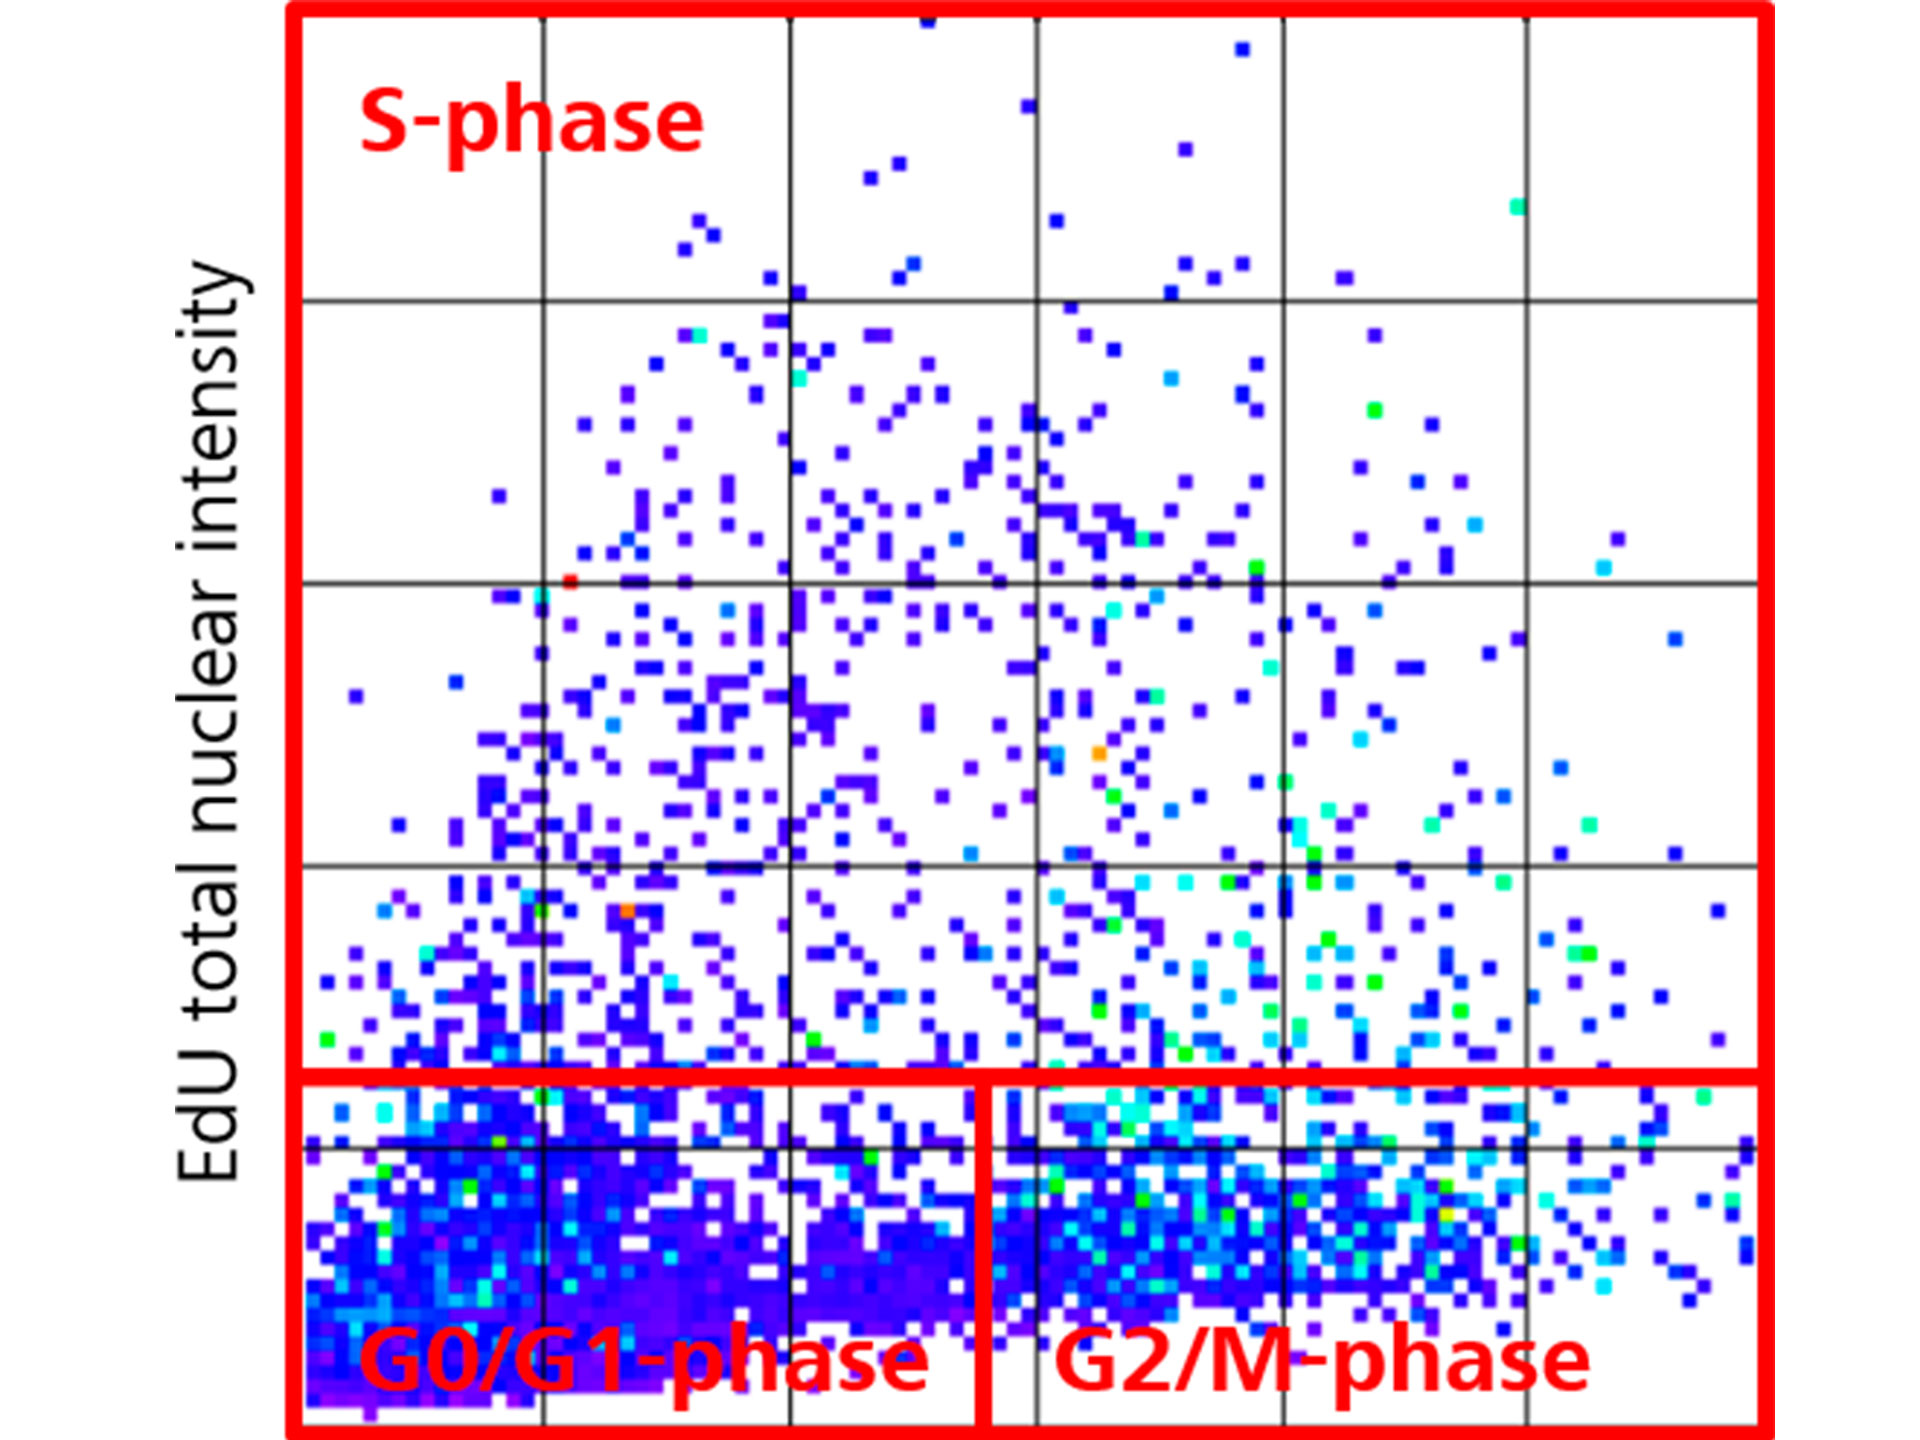 Figure 2B: Scatter plot of single cells based on their total intensities of EdU and DAPI channels